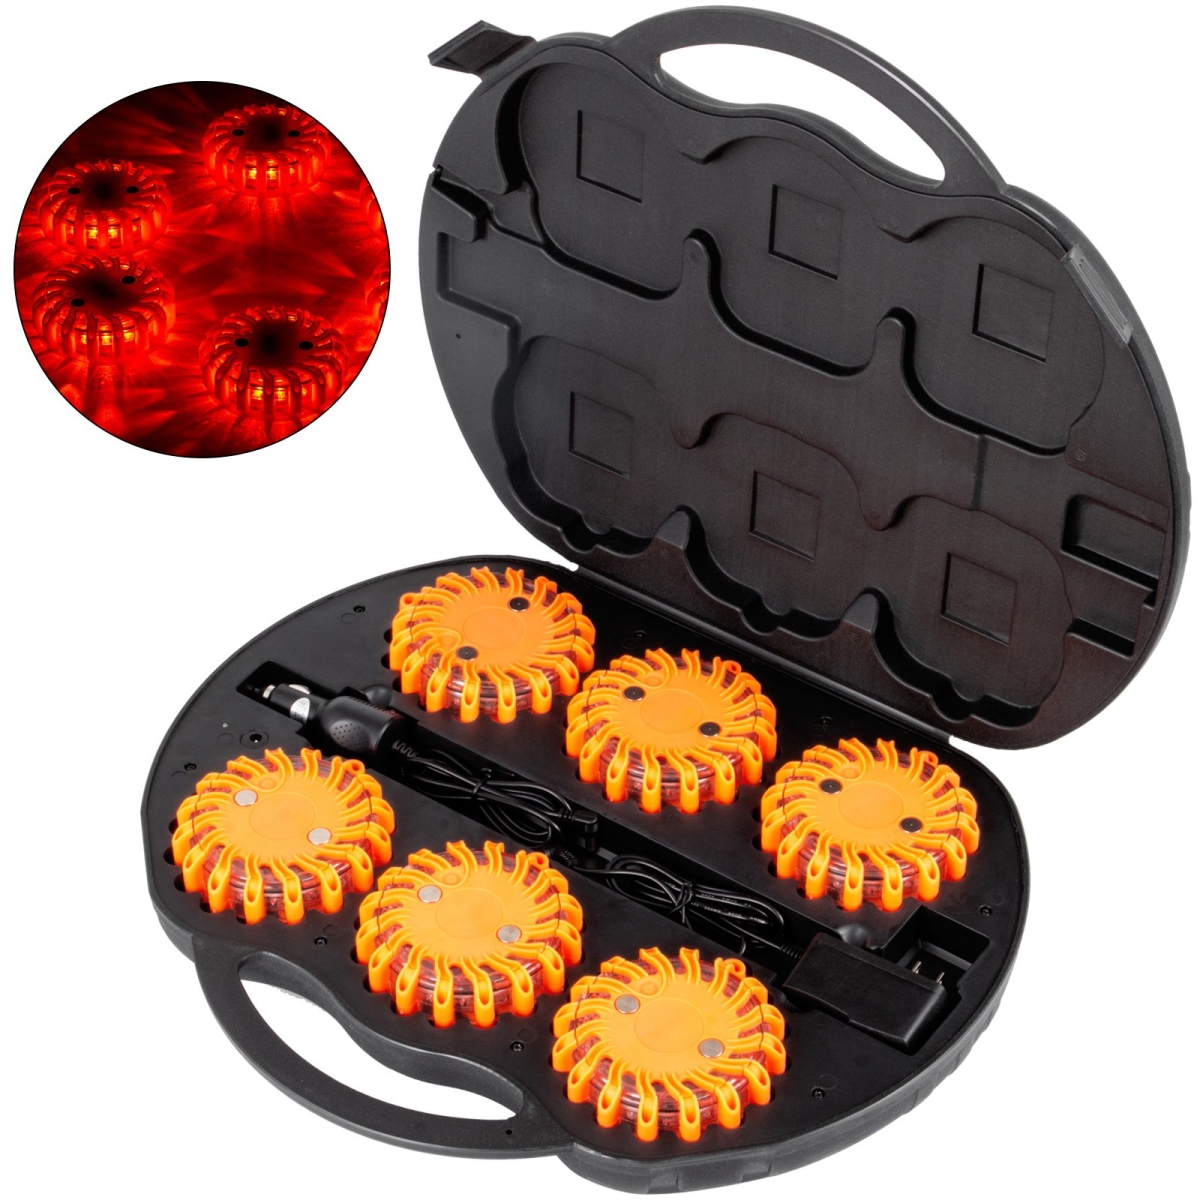 Picture of Vevor XBDBL-20000000001V0 Road Flares Emergency Safety Beacon Magnetic Light with Bag - 6 Piece